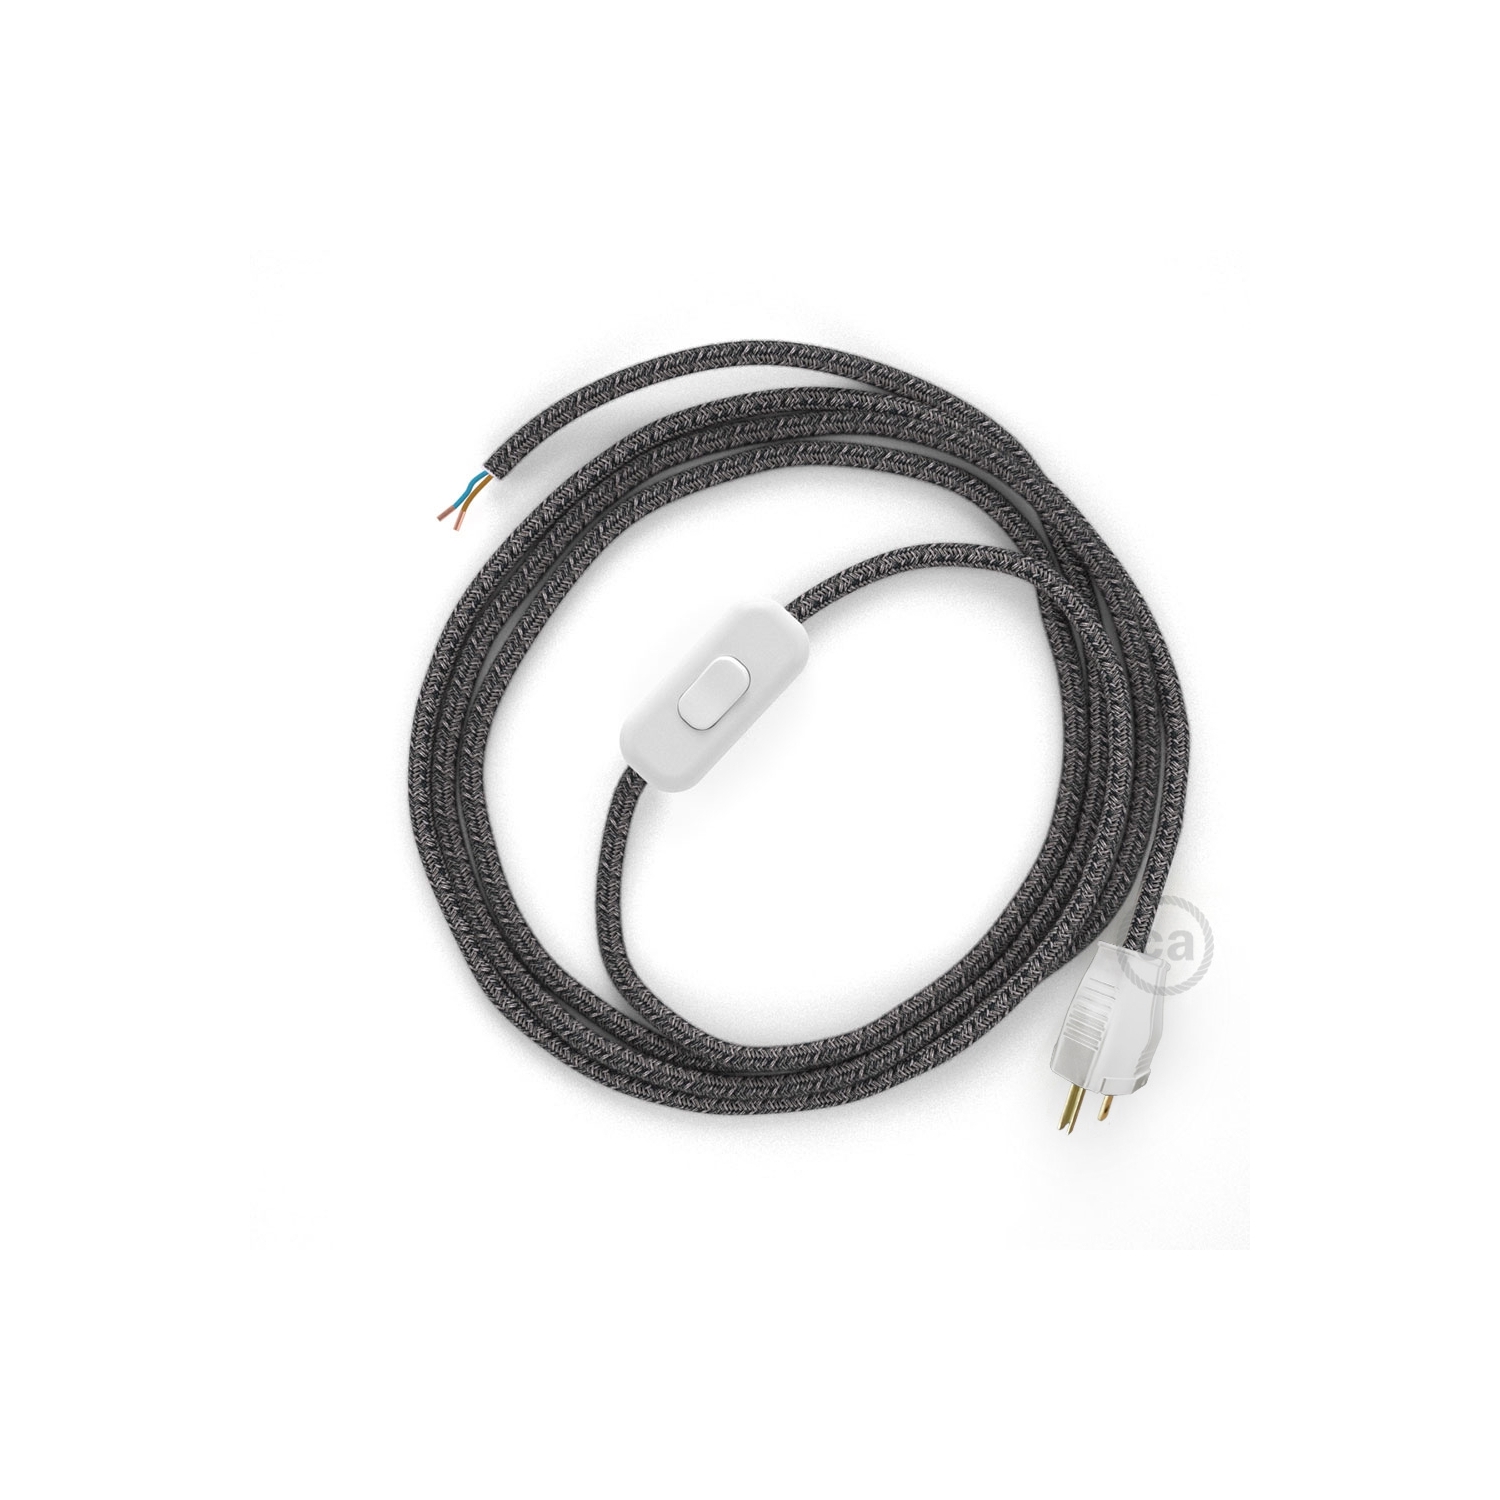 Power Cord with in-line switch, RS81 Black Glitter Cotton & Natural Linen Tweed - Choose color of switch/plug